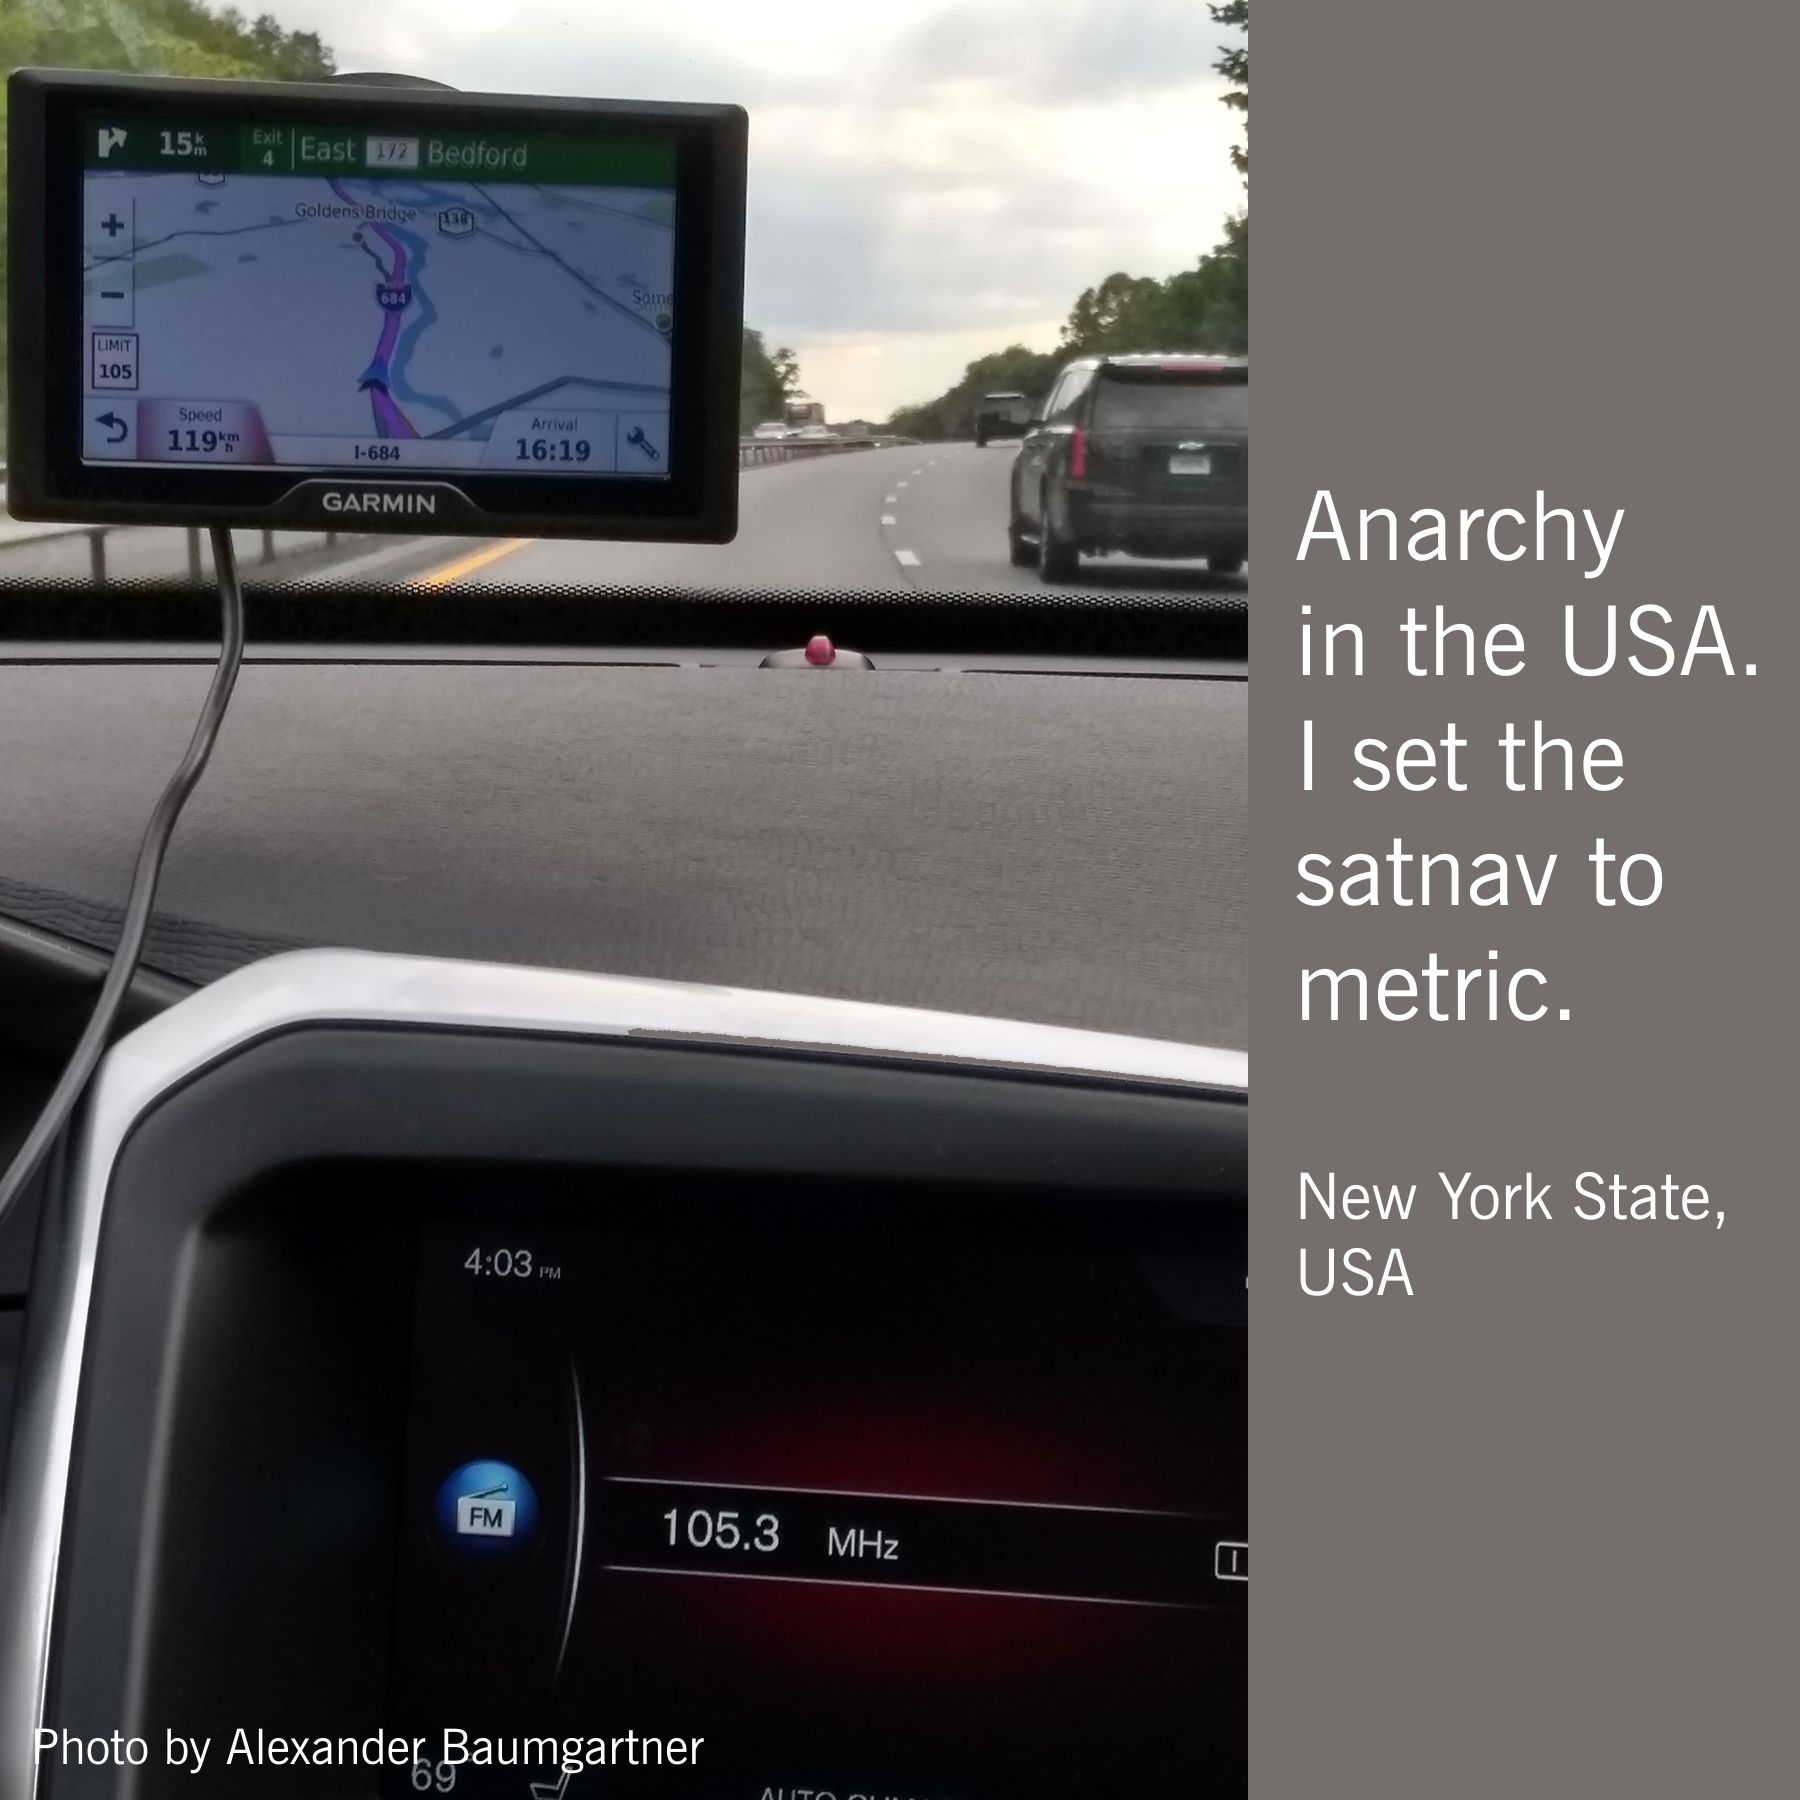 Anarchy in the USA. I set the satnav to metric. 